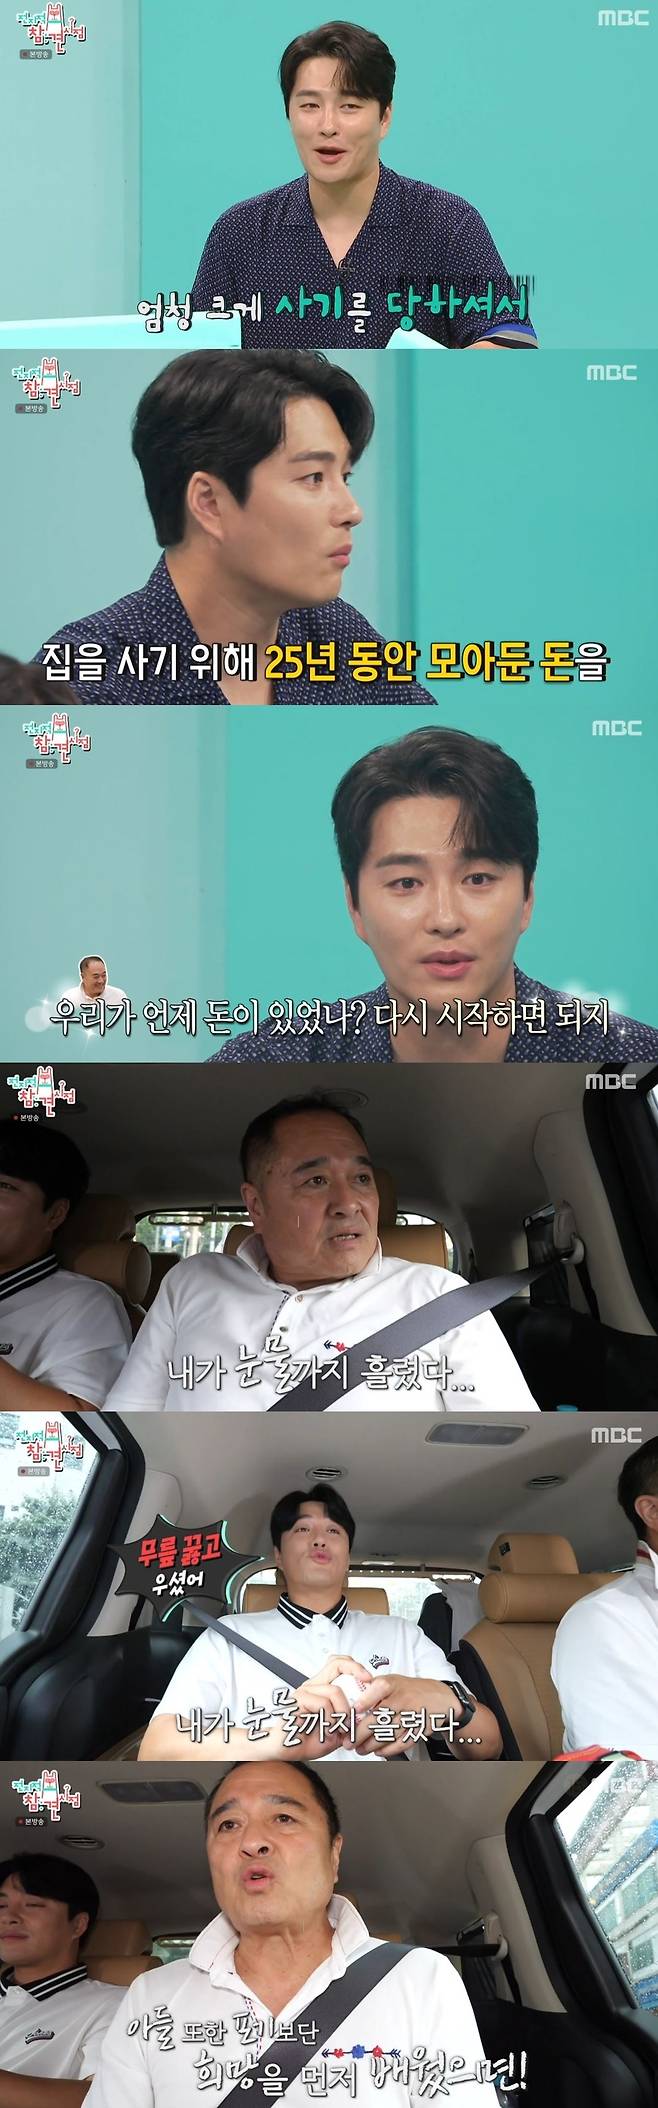 Point of Omniscient Interfere Min Woo Hyuk talks about FatherOn August 12, MBC  ⁇ Point Point of Omniscient Interfere  (hereinafter referred to as Point of Omniscient Interfere), Min Woo Hyuk appeared as a guest.On this day, Min Woo Hyuk said, Our Parent has been running the restaurant for a long time.He said, I was dissatisfied at the time, and Parent said, I am going to go to you with this blessing. However, he finally confessed that he was subjected to the Record of the Grand Historian.Min Woo Hyuk Fathers record of the Grand Historian was in the news. He spent 25 years of money.Then Father took my mothers hand and said, When did we have the money? We can not start again. Because Father gave me such hope, I could not speak anymore. And I did not give up my dream.In addition, Min Woo Hyuk brought up another episode about Father as he went for a LG Twins verse.Min Woo Hyuk said, I actually received quite a lot of verse requests. I rebuffed all of them and only sang the national anthem in the Korean series.I gave everything I had to become a baseball player, he said. I have never seen him on the mound in a professional stage.I decided that it would be a great gift if I showed you how to wear a uniform when you are young and climb to the regular stadium mound. Min Woo Hyuk said, My father got down on his knees and cried. He told me that if I give up, I cant do anything. He told me to do The Graduate only in high school, referring to the time when he quit baseball.Father of Min Woo Hyuk said, I was thinking that I should leave the movement and somehow let the school graduate.After that, Min Woo Hyuk said, I can not do it when I try hard to wear this uniform.On the mound, he hit the ball vigorously, but Father drew attention with joy, saying, As I live, Ill see him throw the ball at the baseball stadium. Its good that Ive achieved my dream.